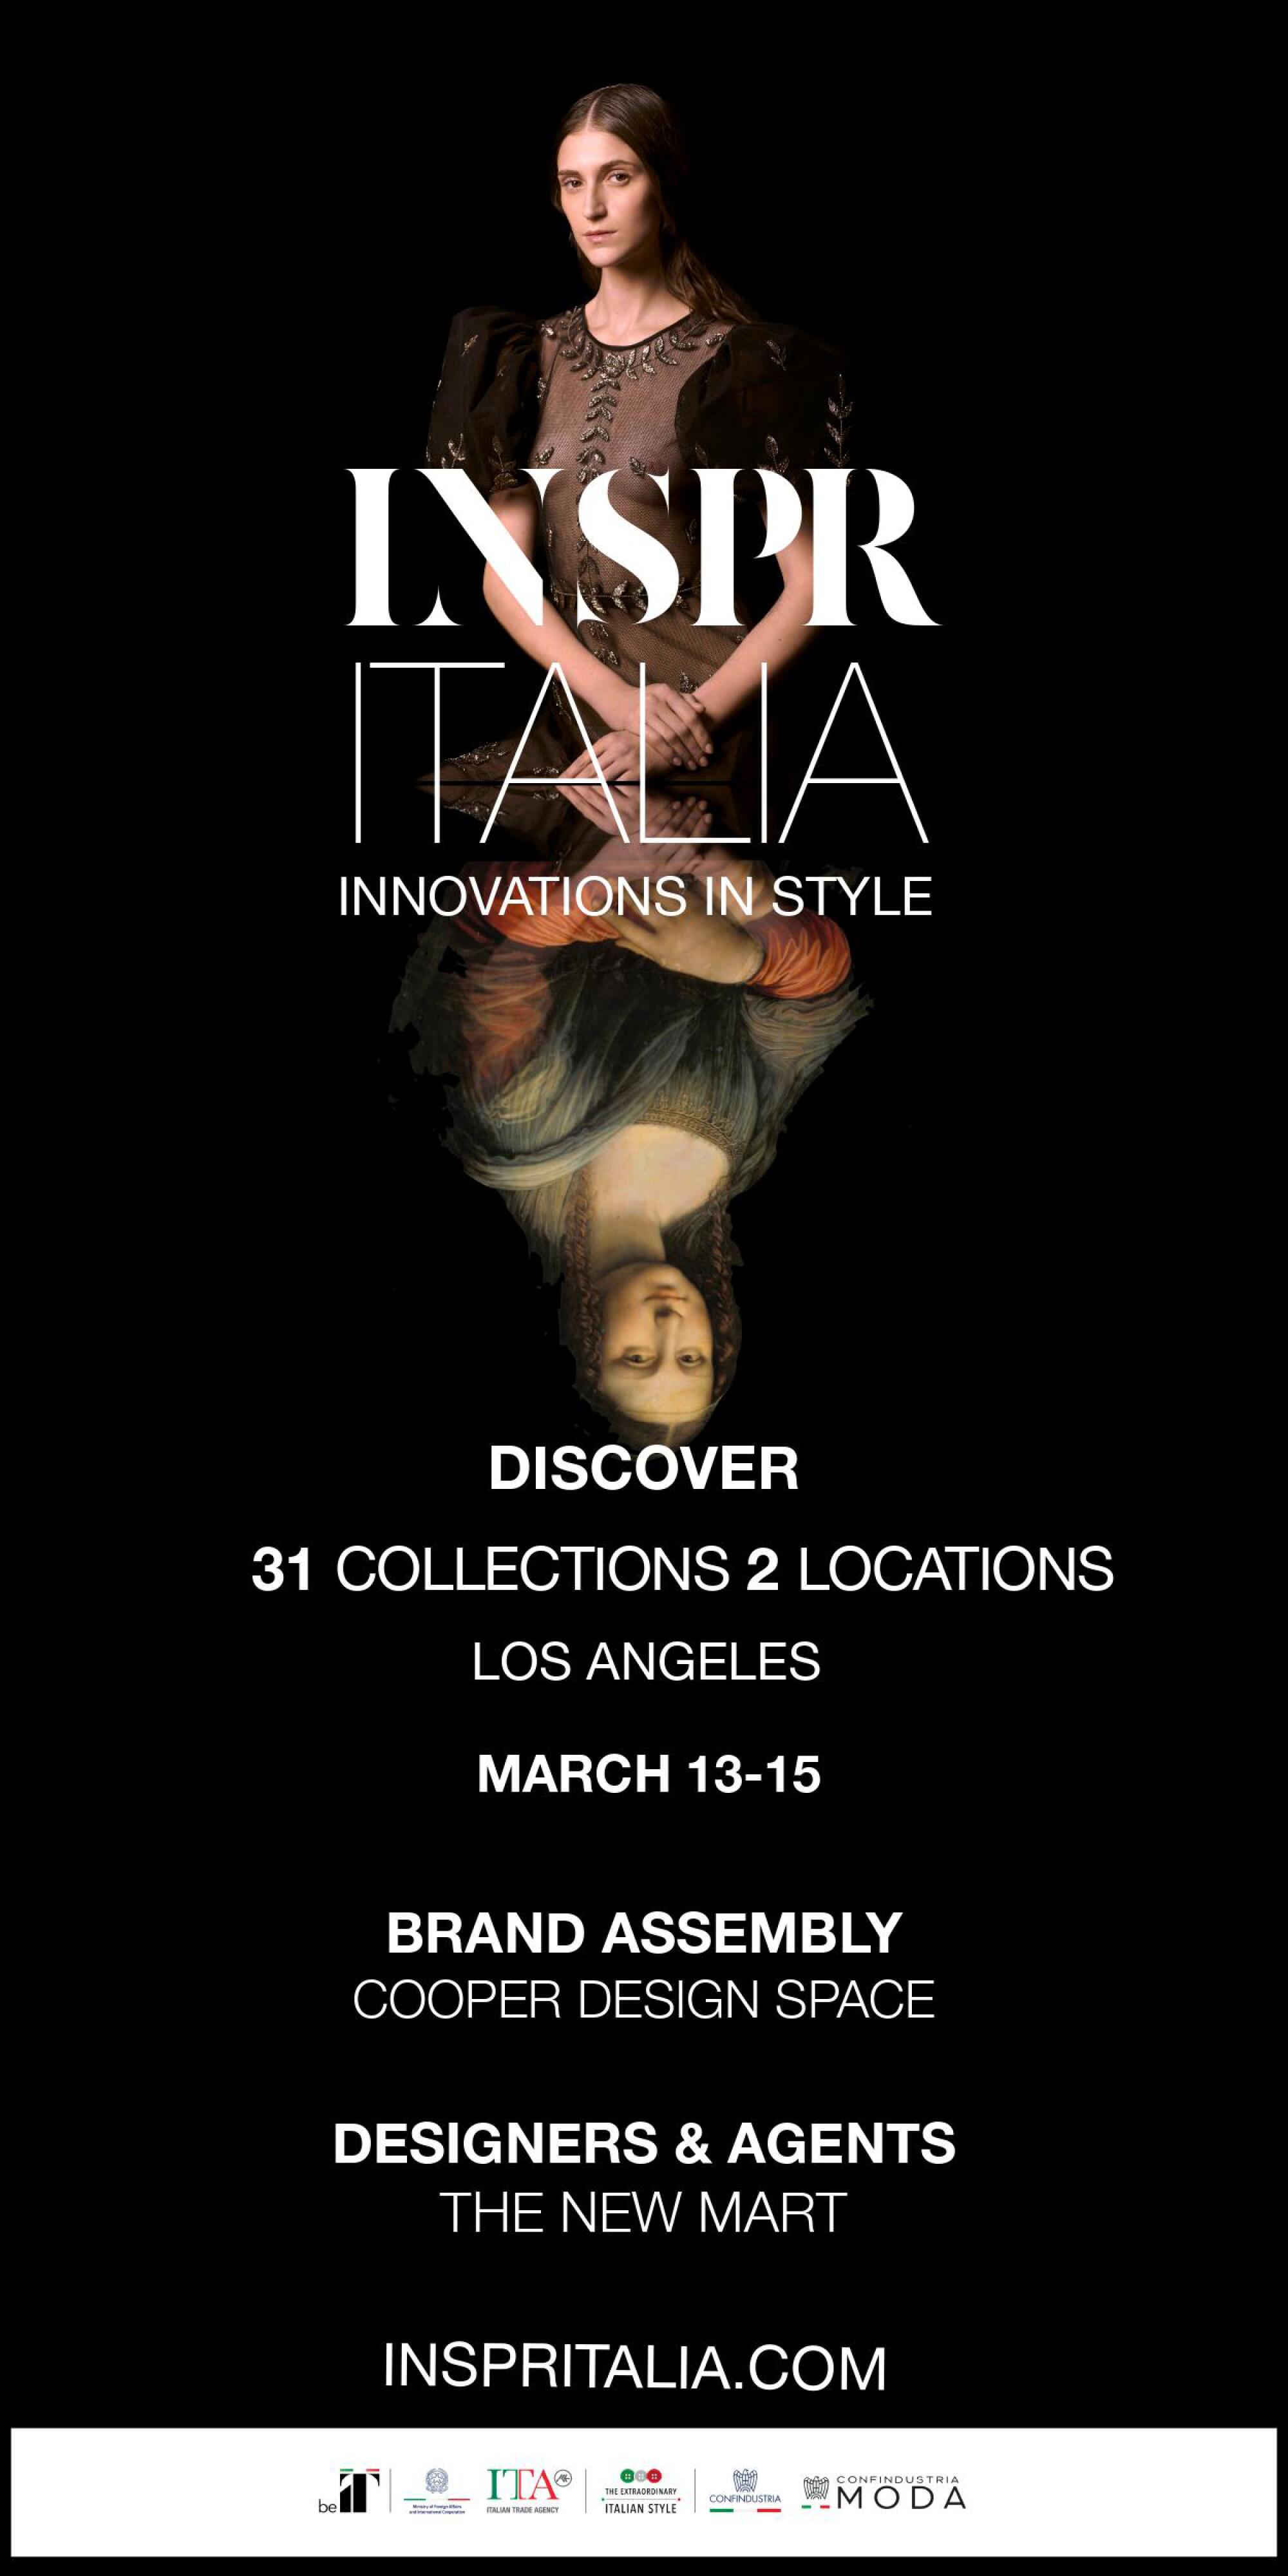 A black event flyer with the words ”INSPR ITALIA” and other event information